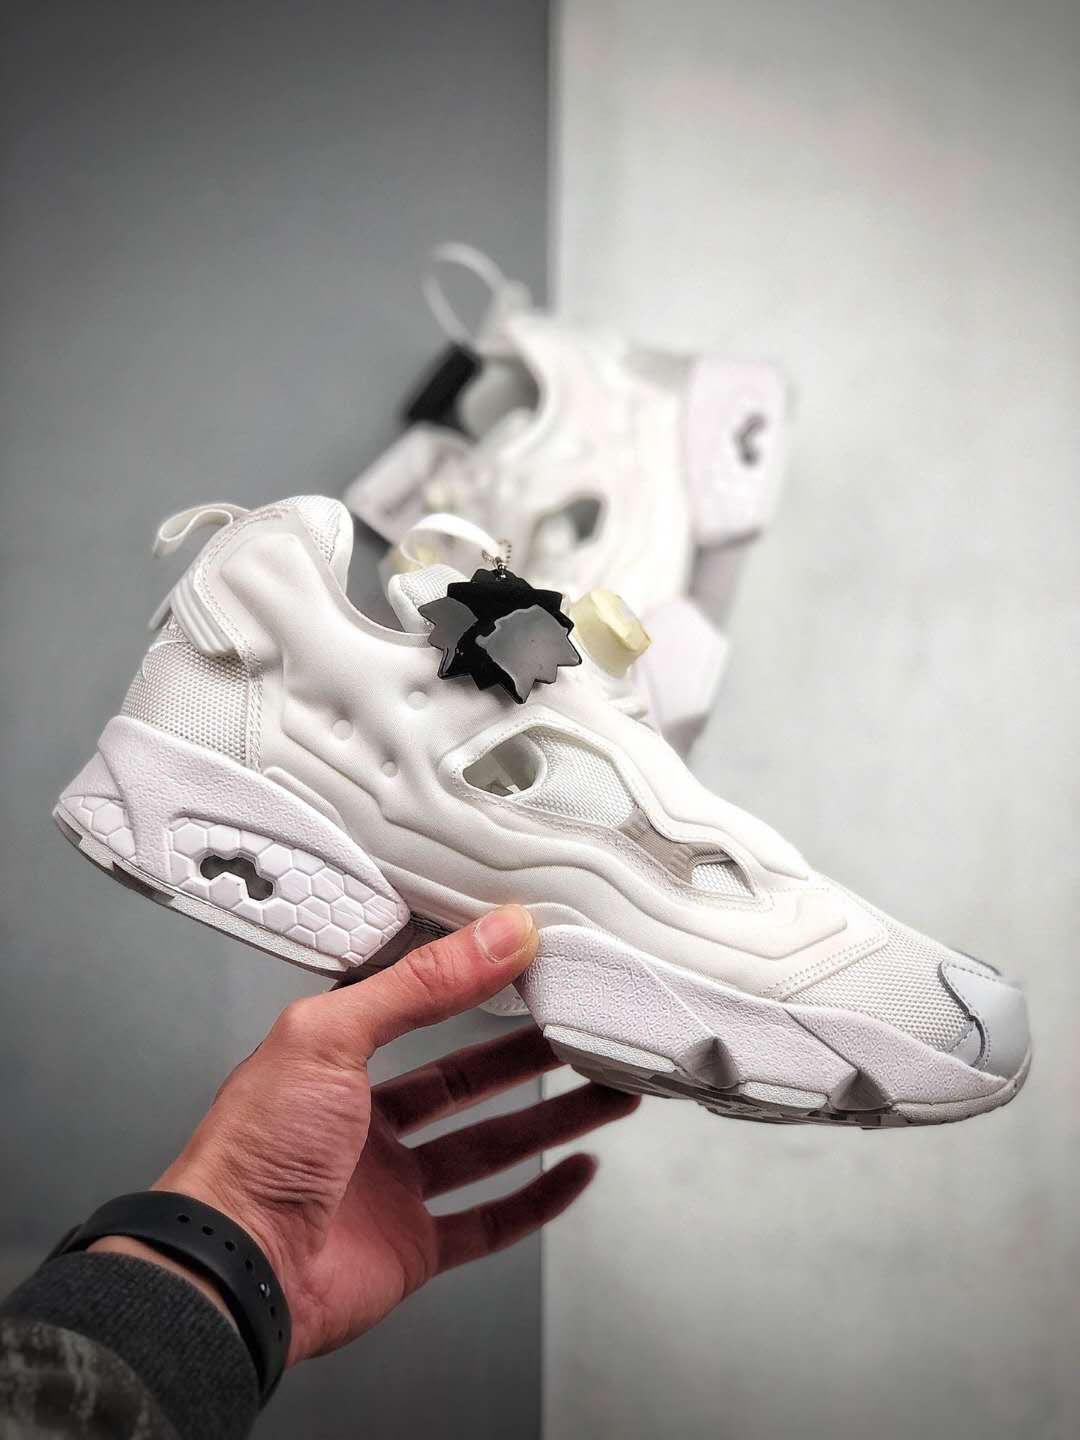 Reebok InstaPump Fury OG 'White' AR2199 - Classic Sneaker for Style and Comfort!